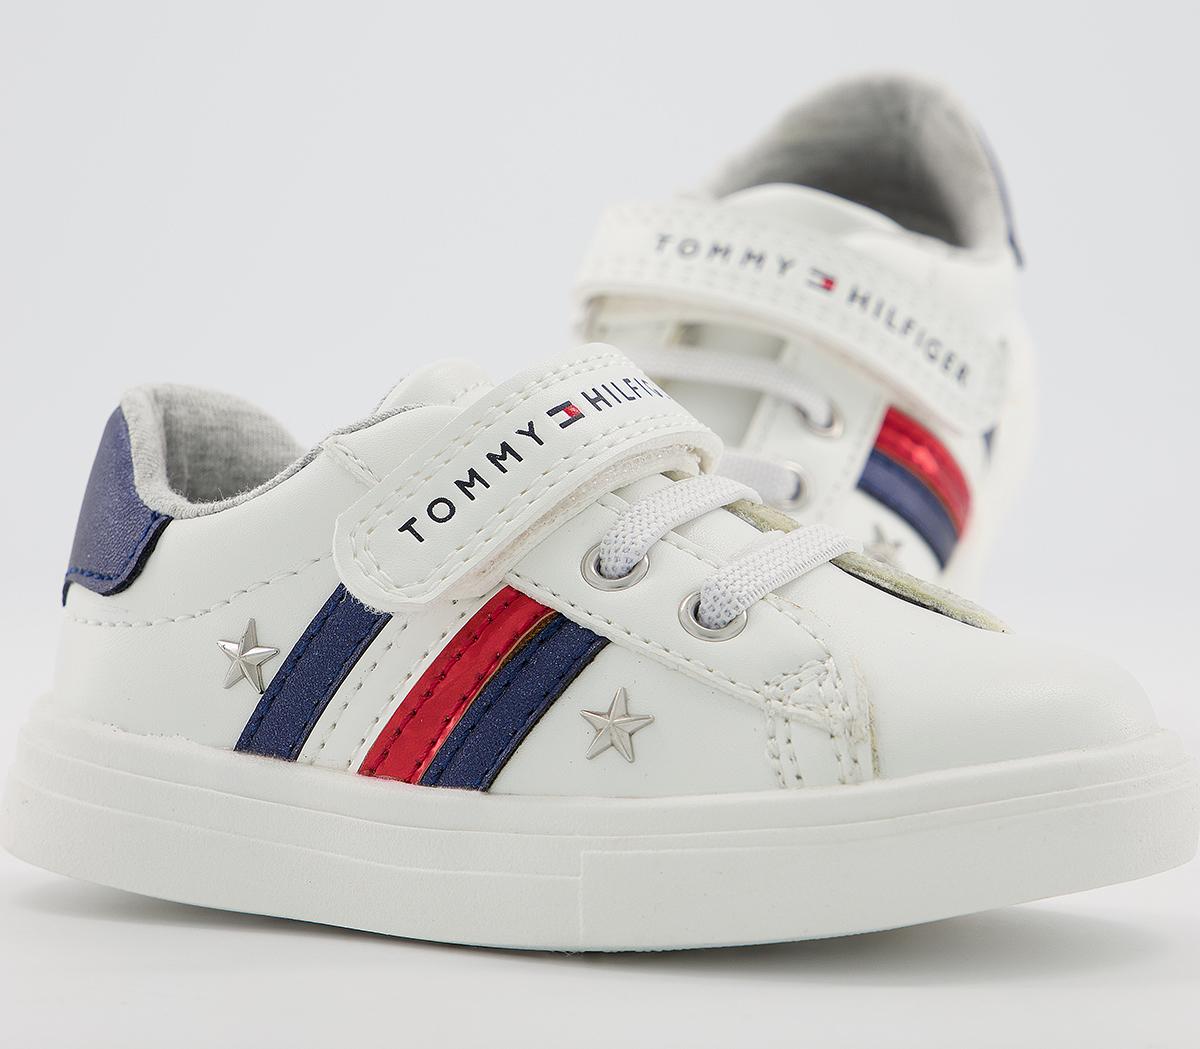 Tommy Hilfiger Tommy Sneaker 4-6 Trainers White Blue Red Metallic Star ...